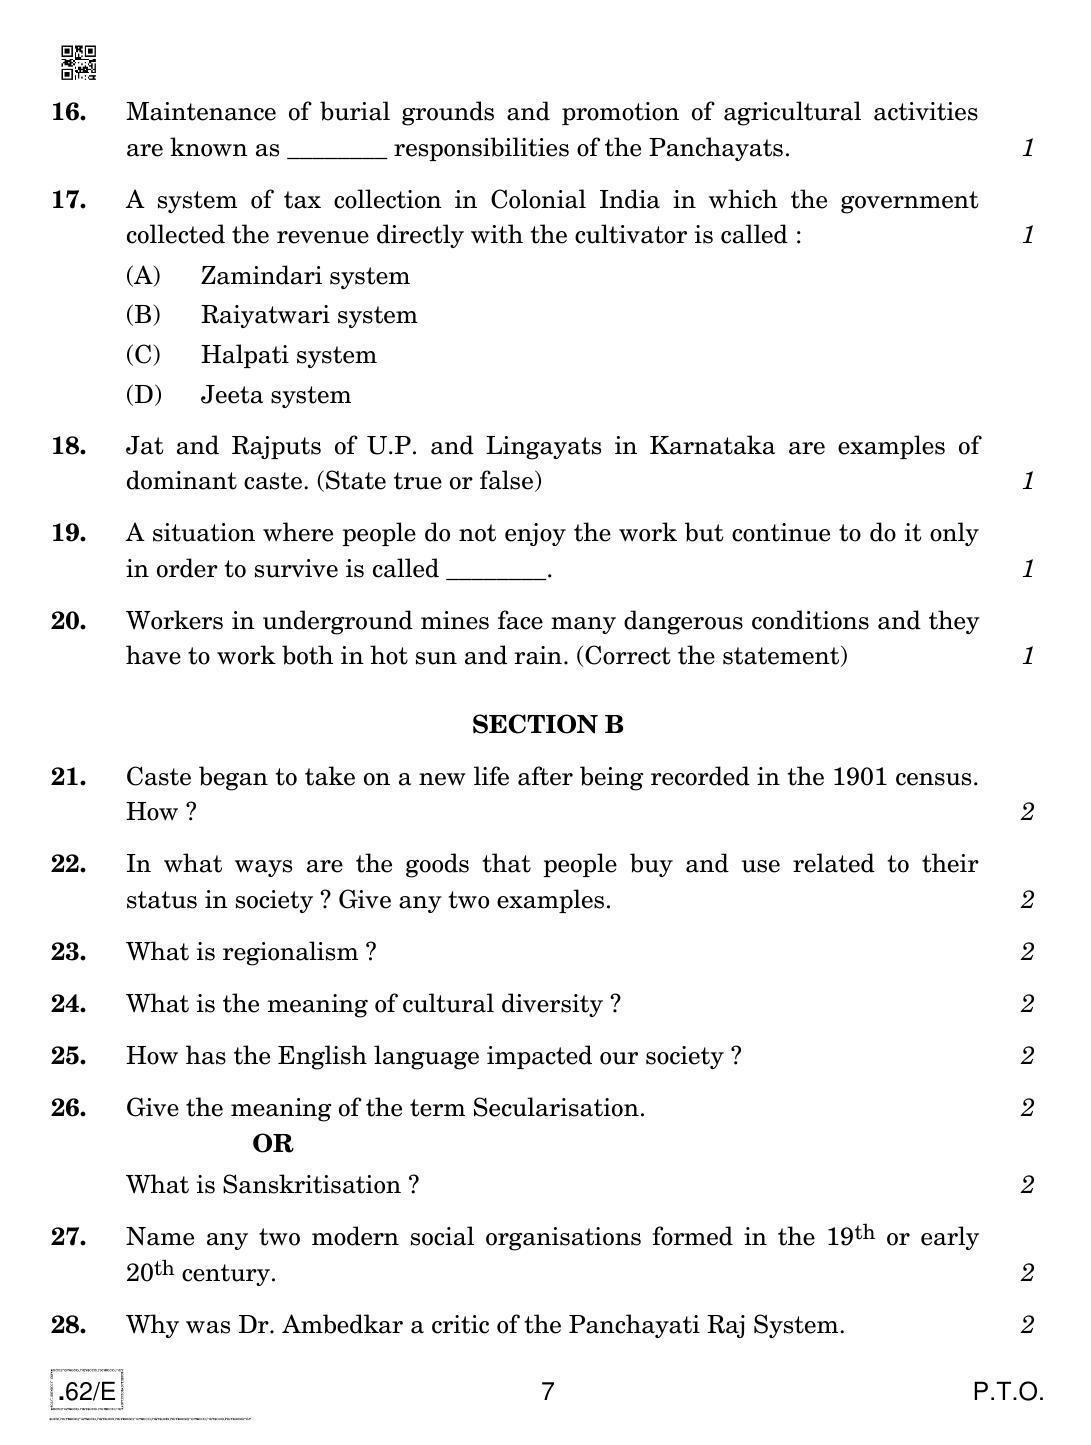 CBSE Class 12 Sociology 2020 Compartment Question Paper - Page 7